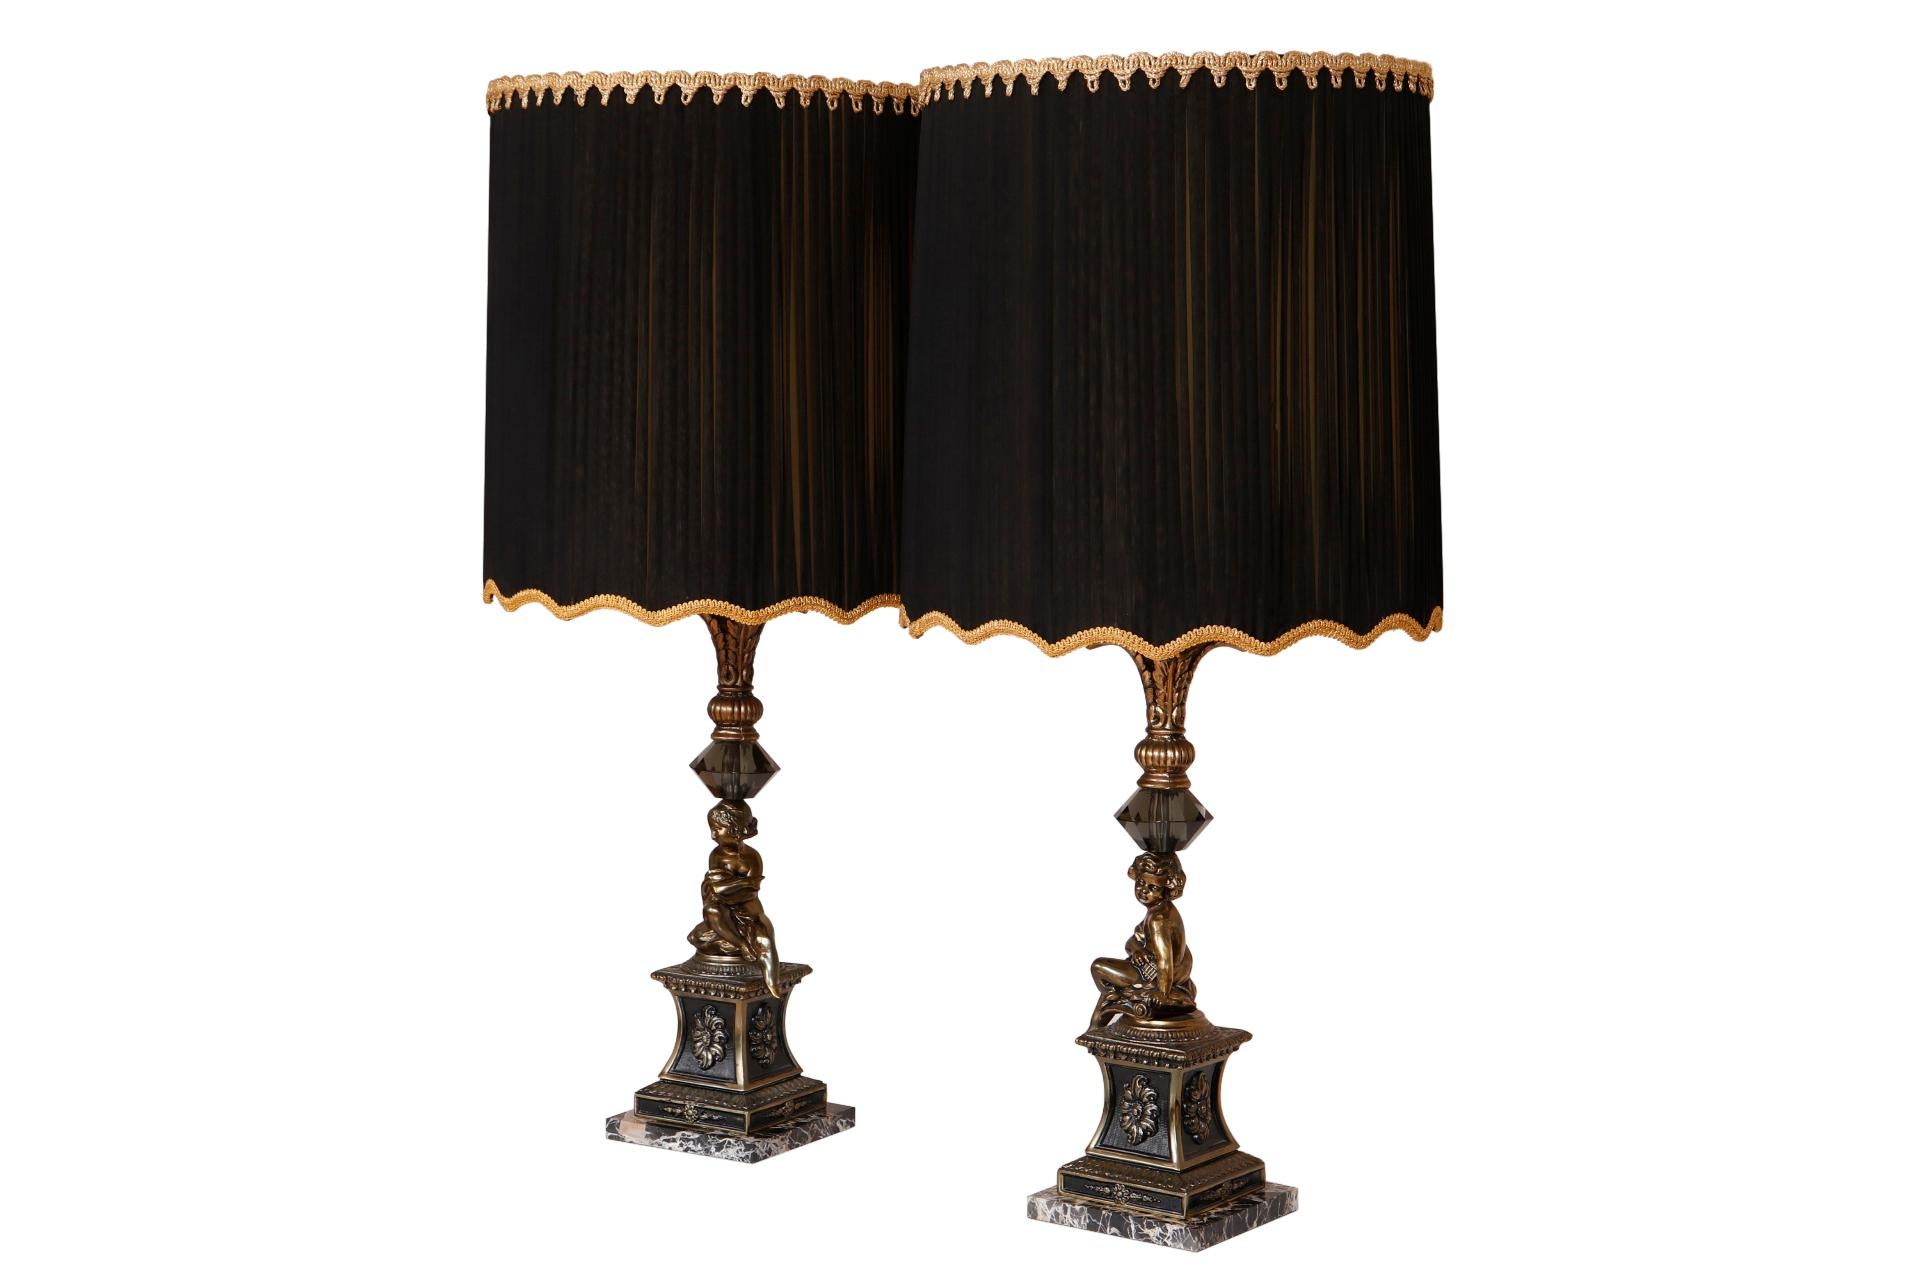 A pair of figural French Empire style table lamps. Rouched black shades are trimmed with a rope twist detail and gold gimp. Columns are topped with cast brass acanthus plumes above large cut glass crystals. Opposing cast cherubs sit on painted metal